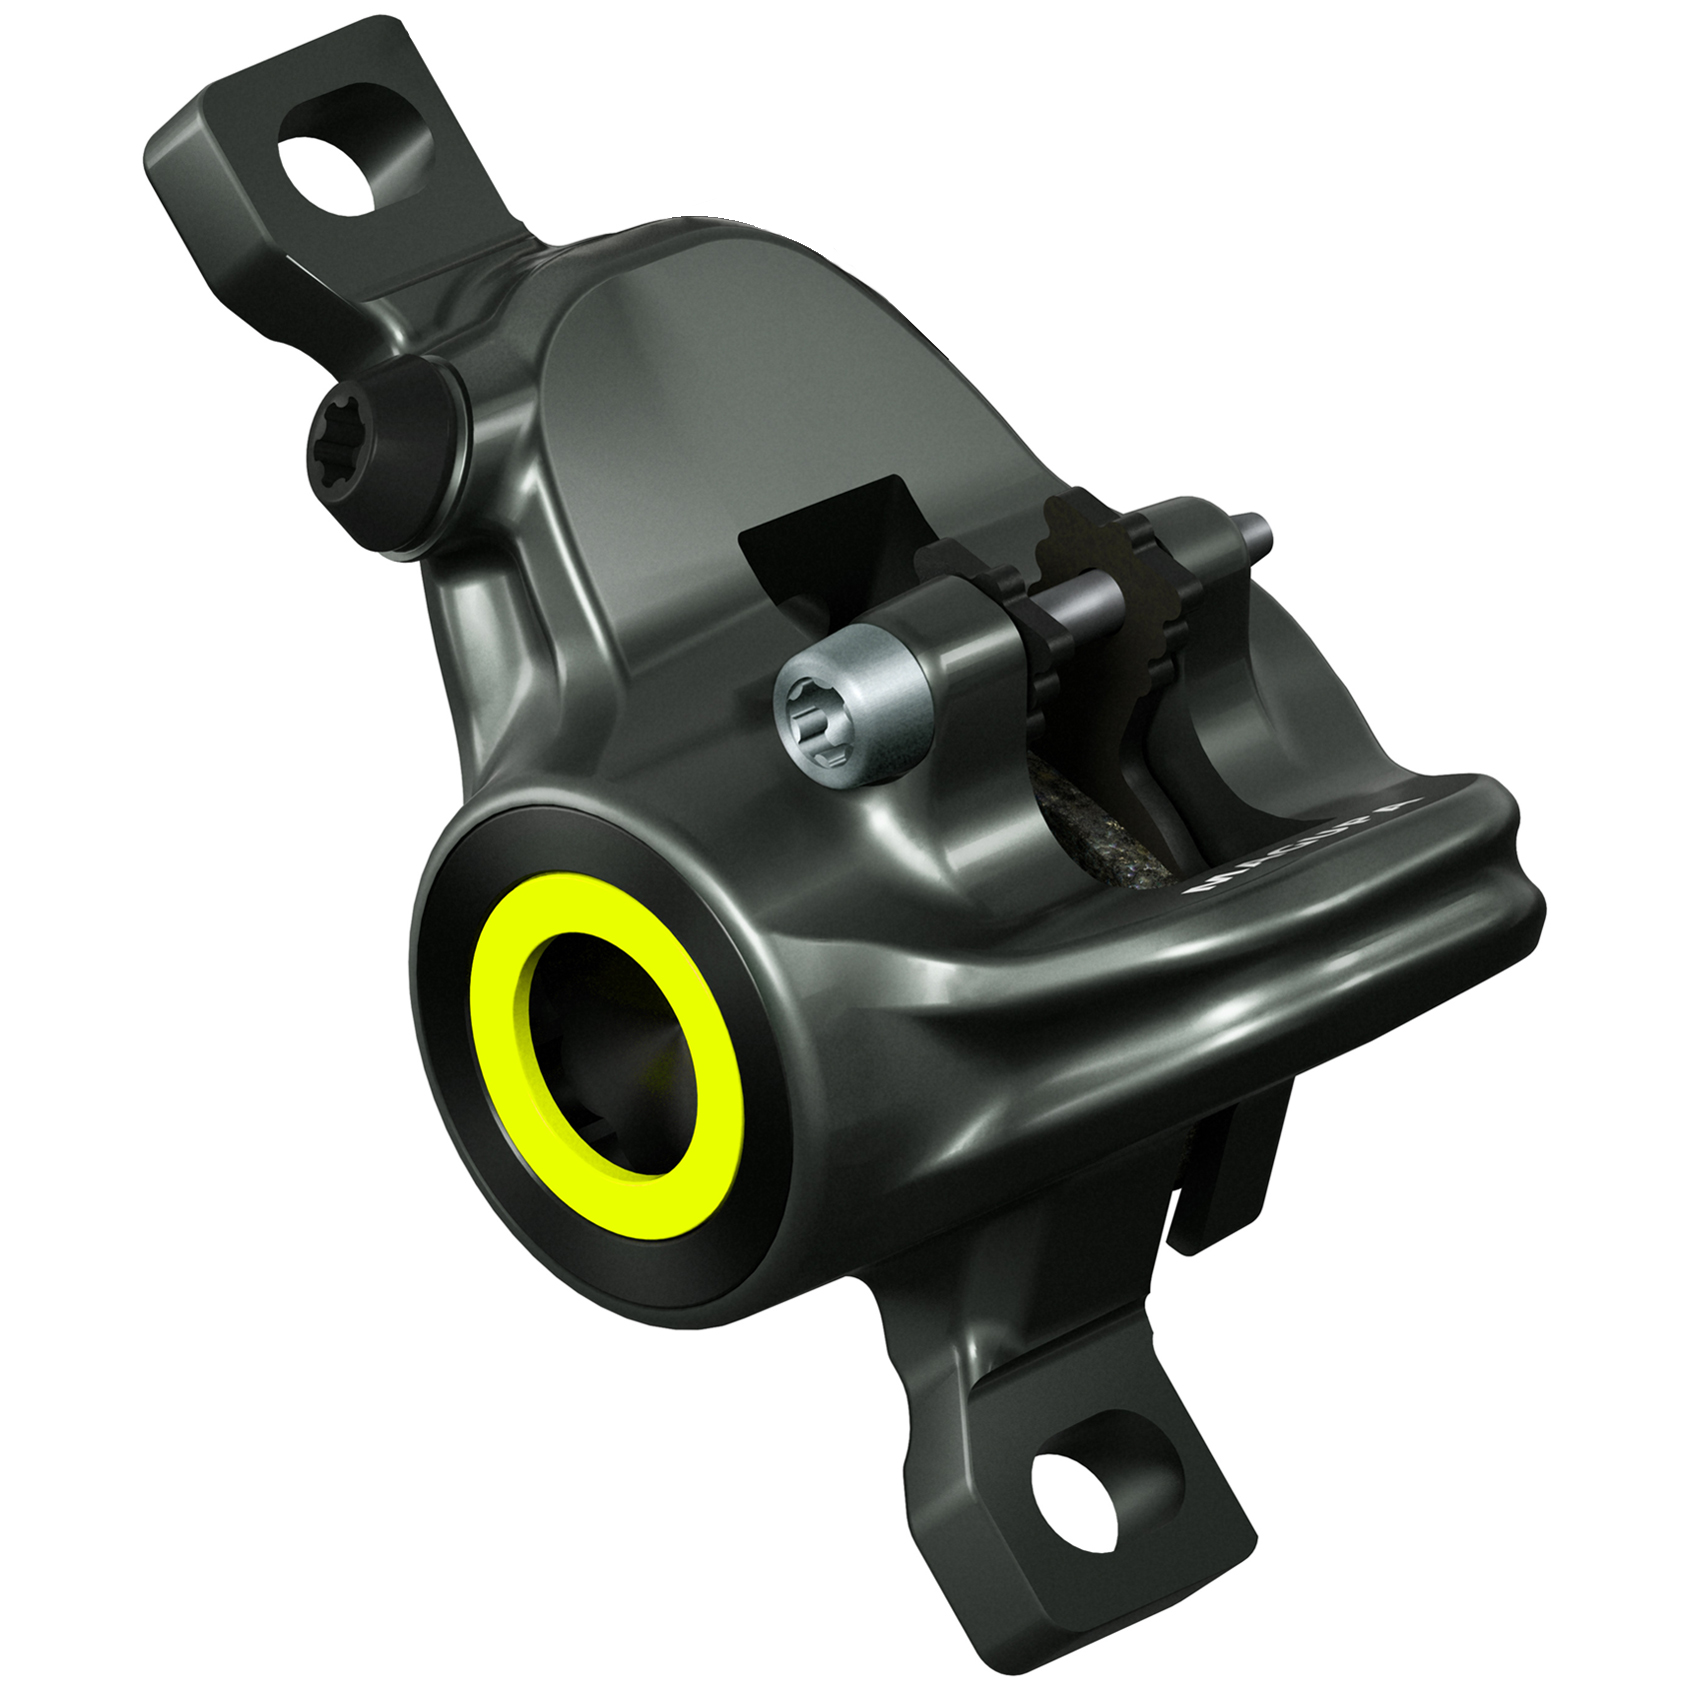 Picture of Magura Brake Caliper for MT8 SL Disc Brakes from MY2019 - 2701726 - mystic grey / neon red / neon yellow